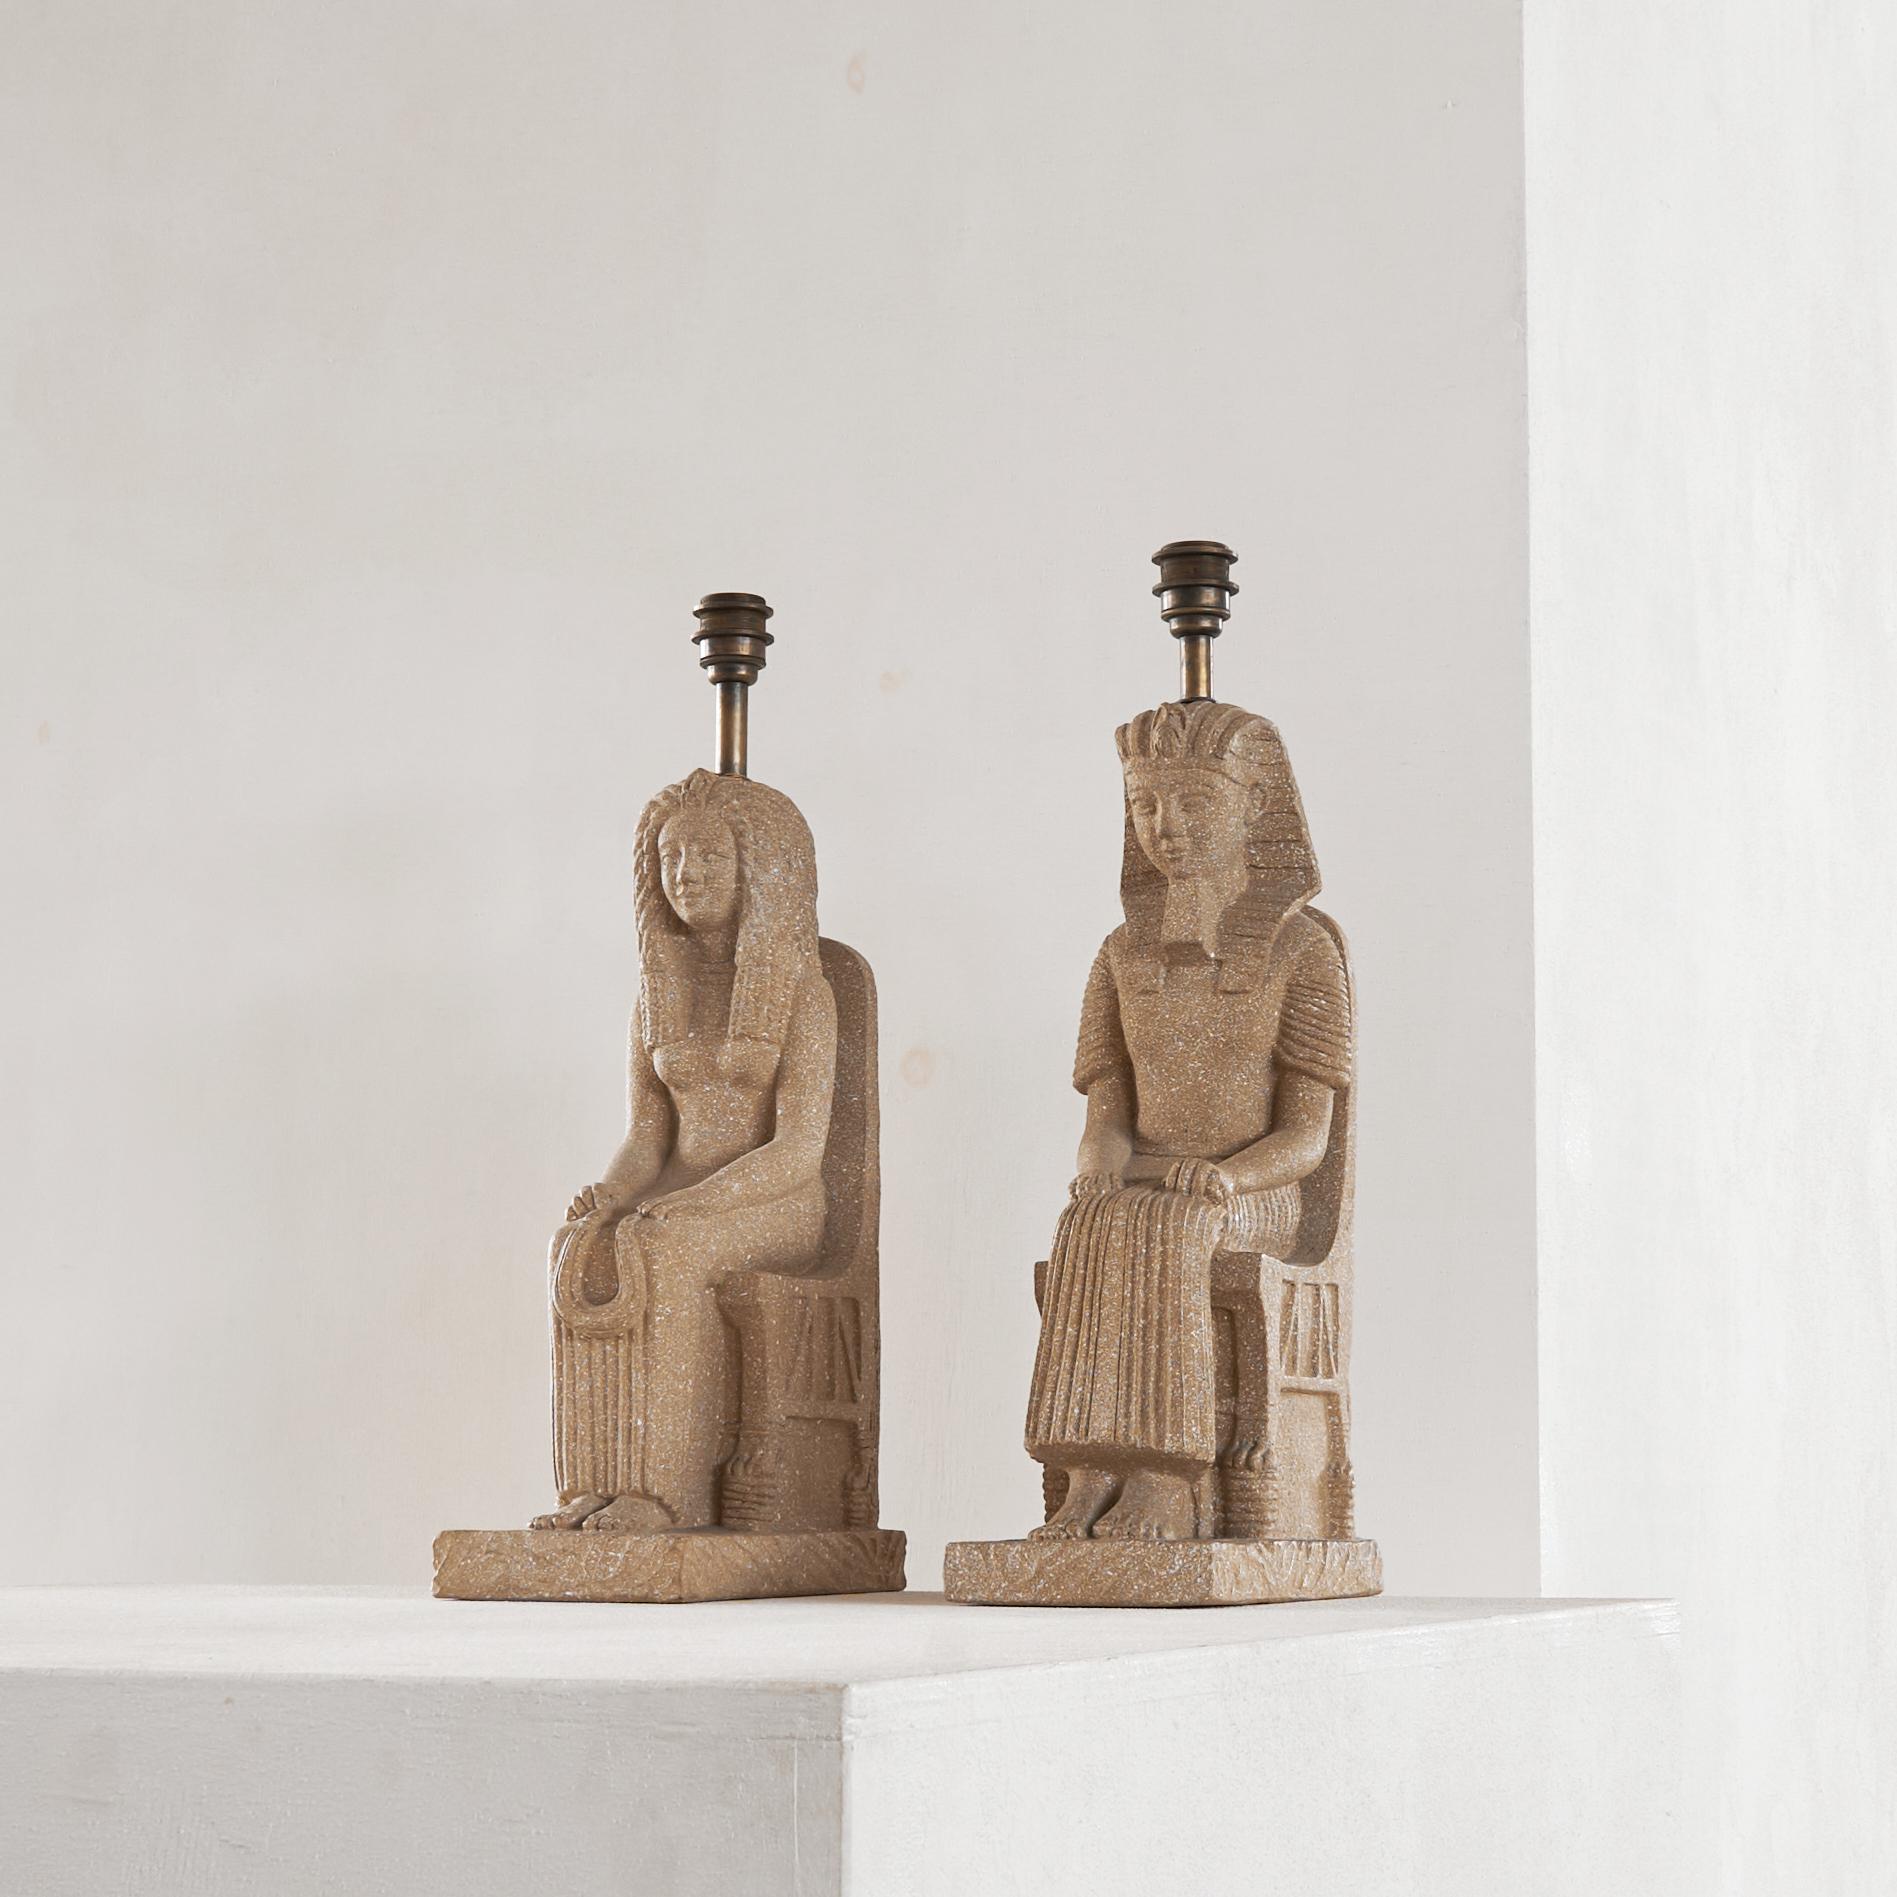 Zaccagnini Pair of Monumental Pharaoh Ceramic Table Lamps, Florence, Italy, 1970s.

This is a wonderful and large pair of ceramic Pharaoh table lamps by the famous Zaccagnini family business from Florence, Italy. Monumental in size and appearance,